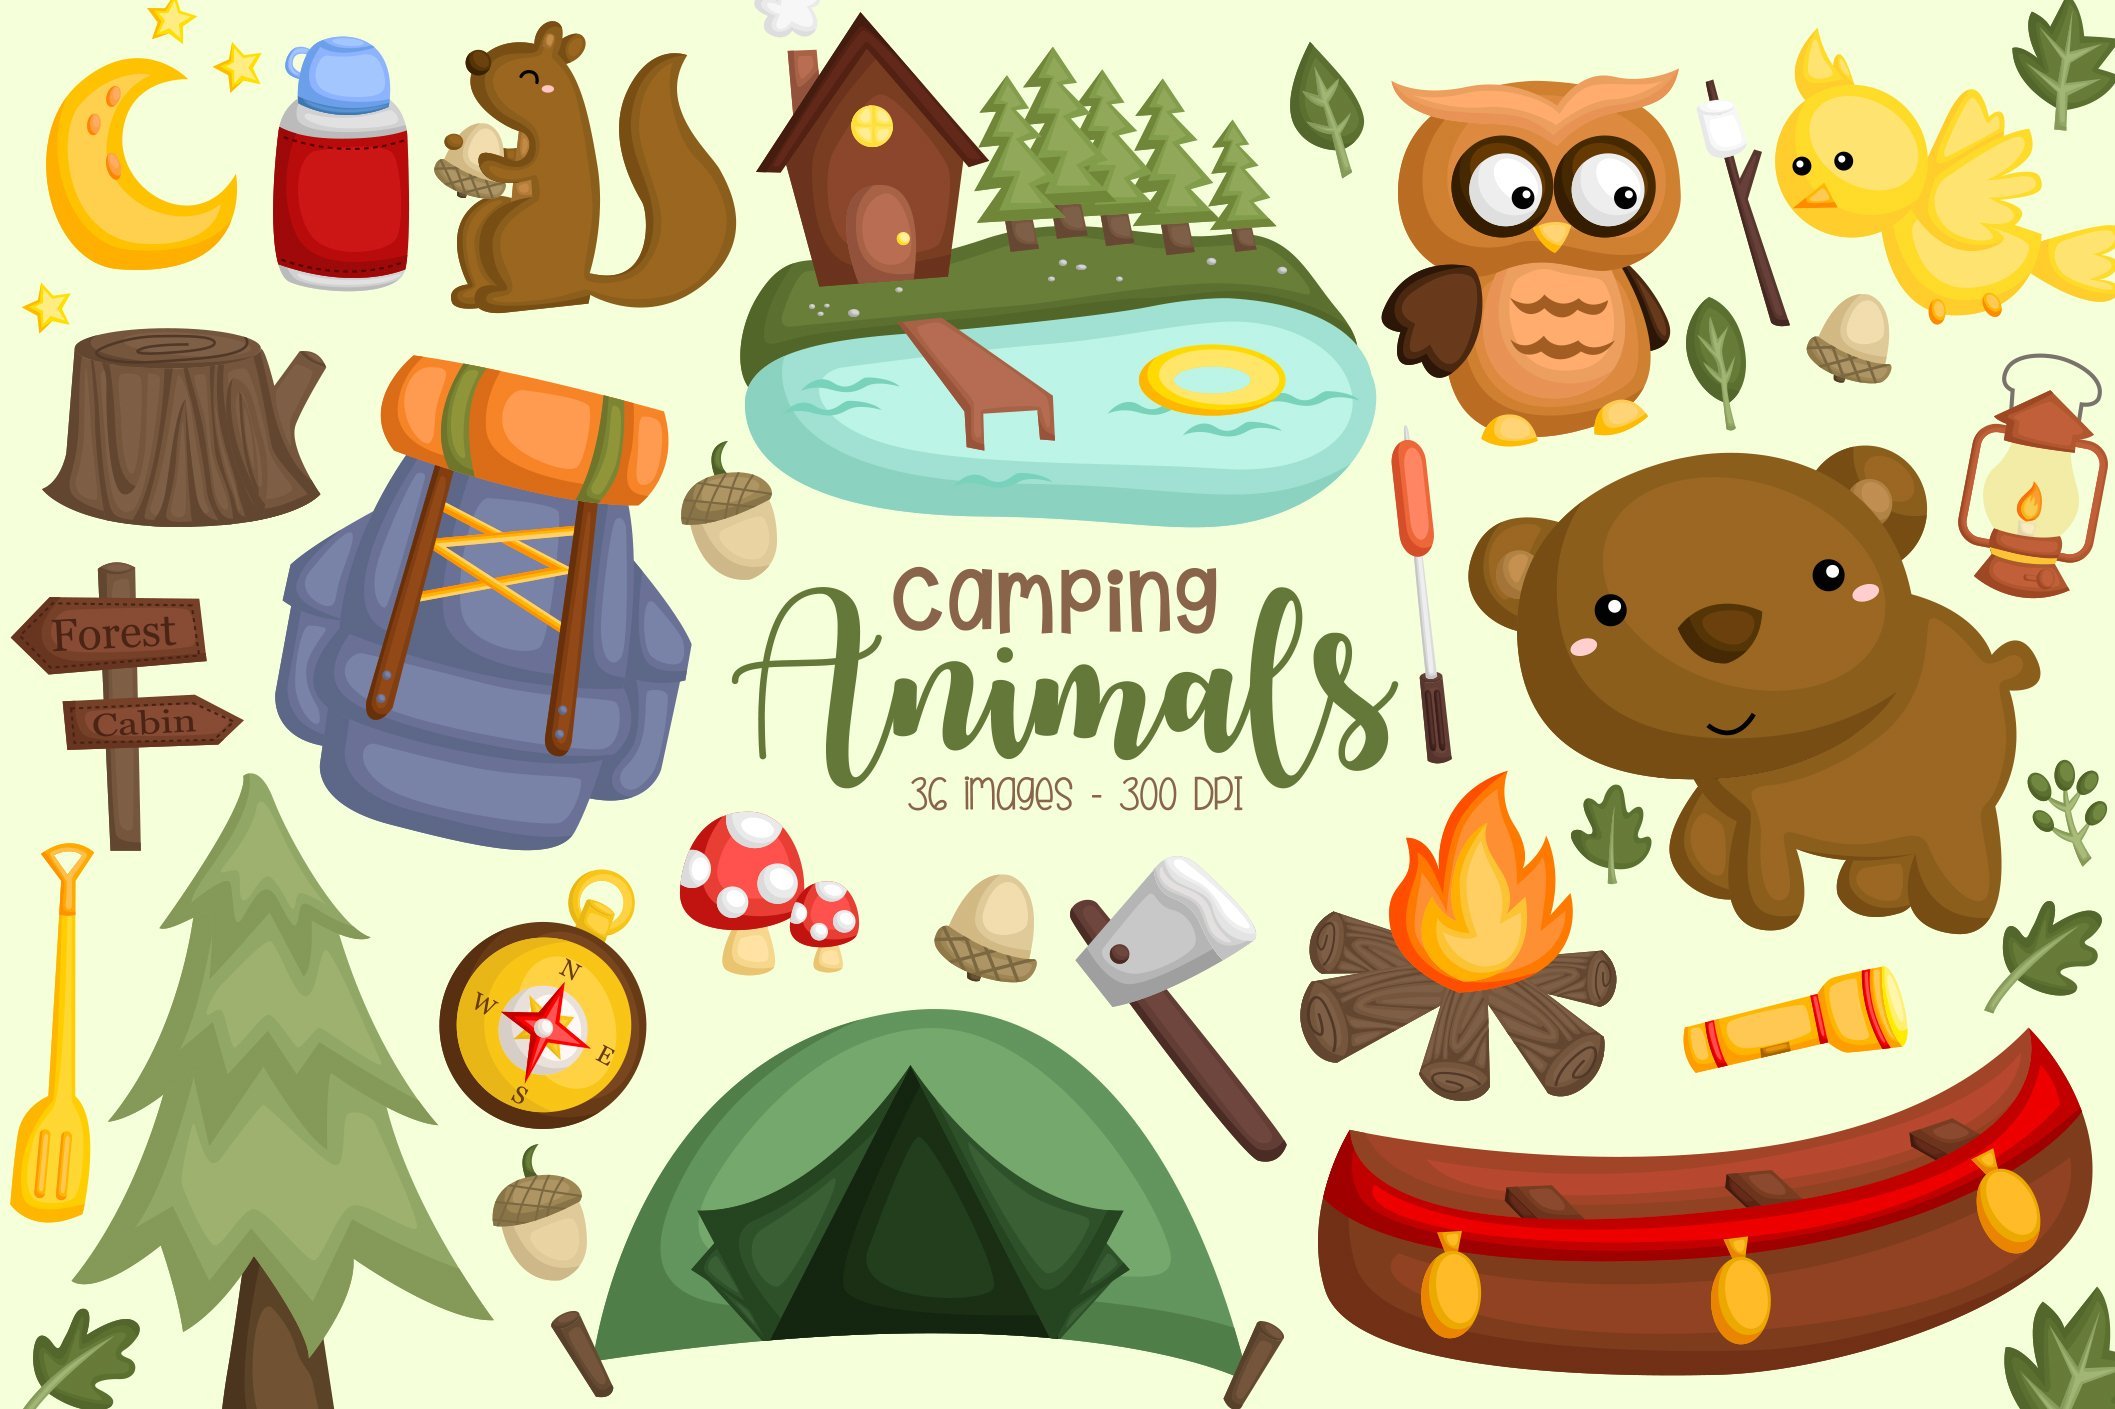 Camp for animals.